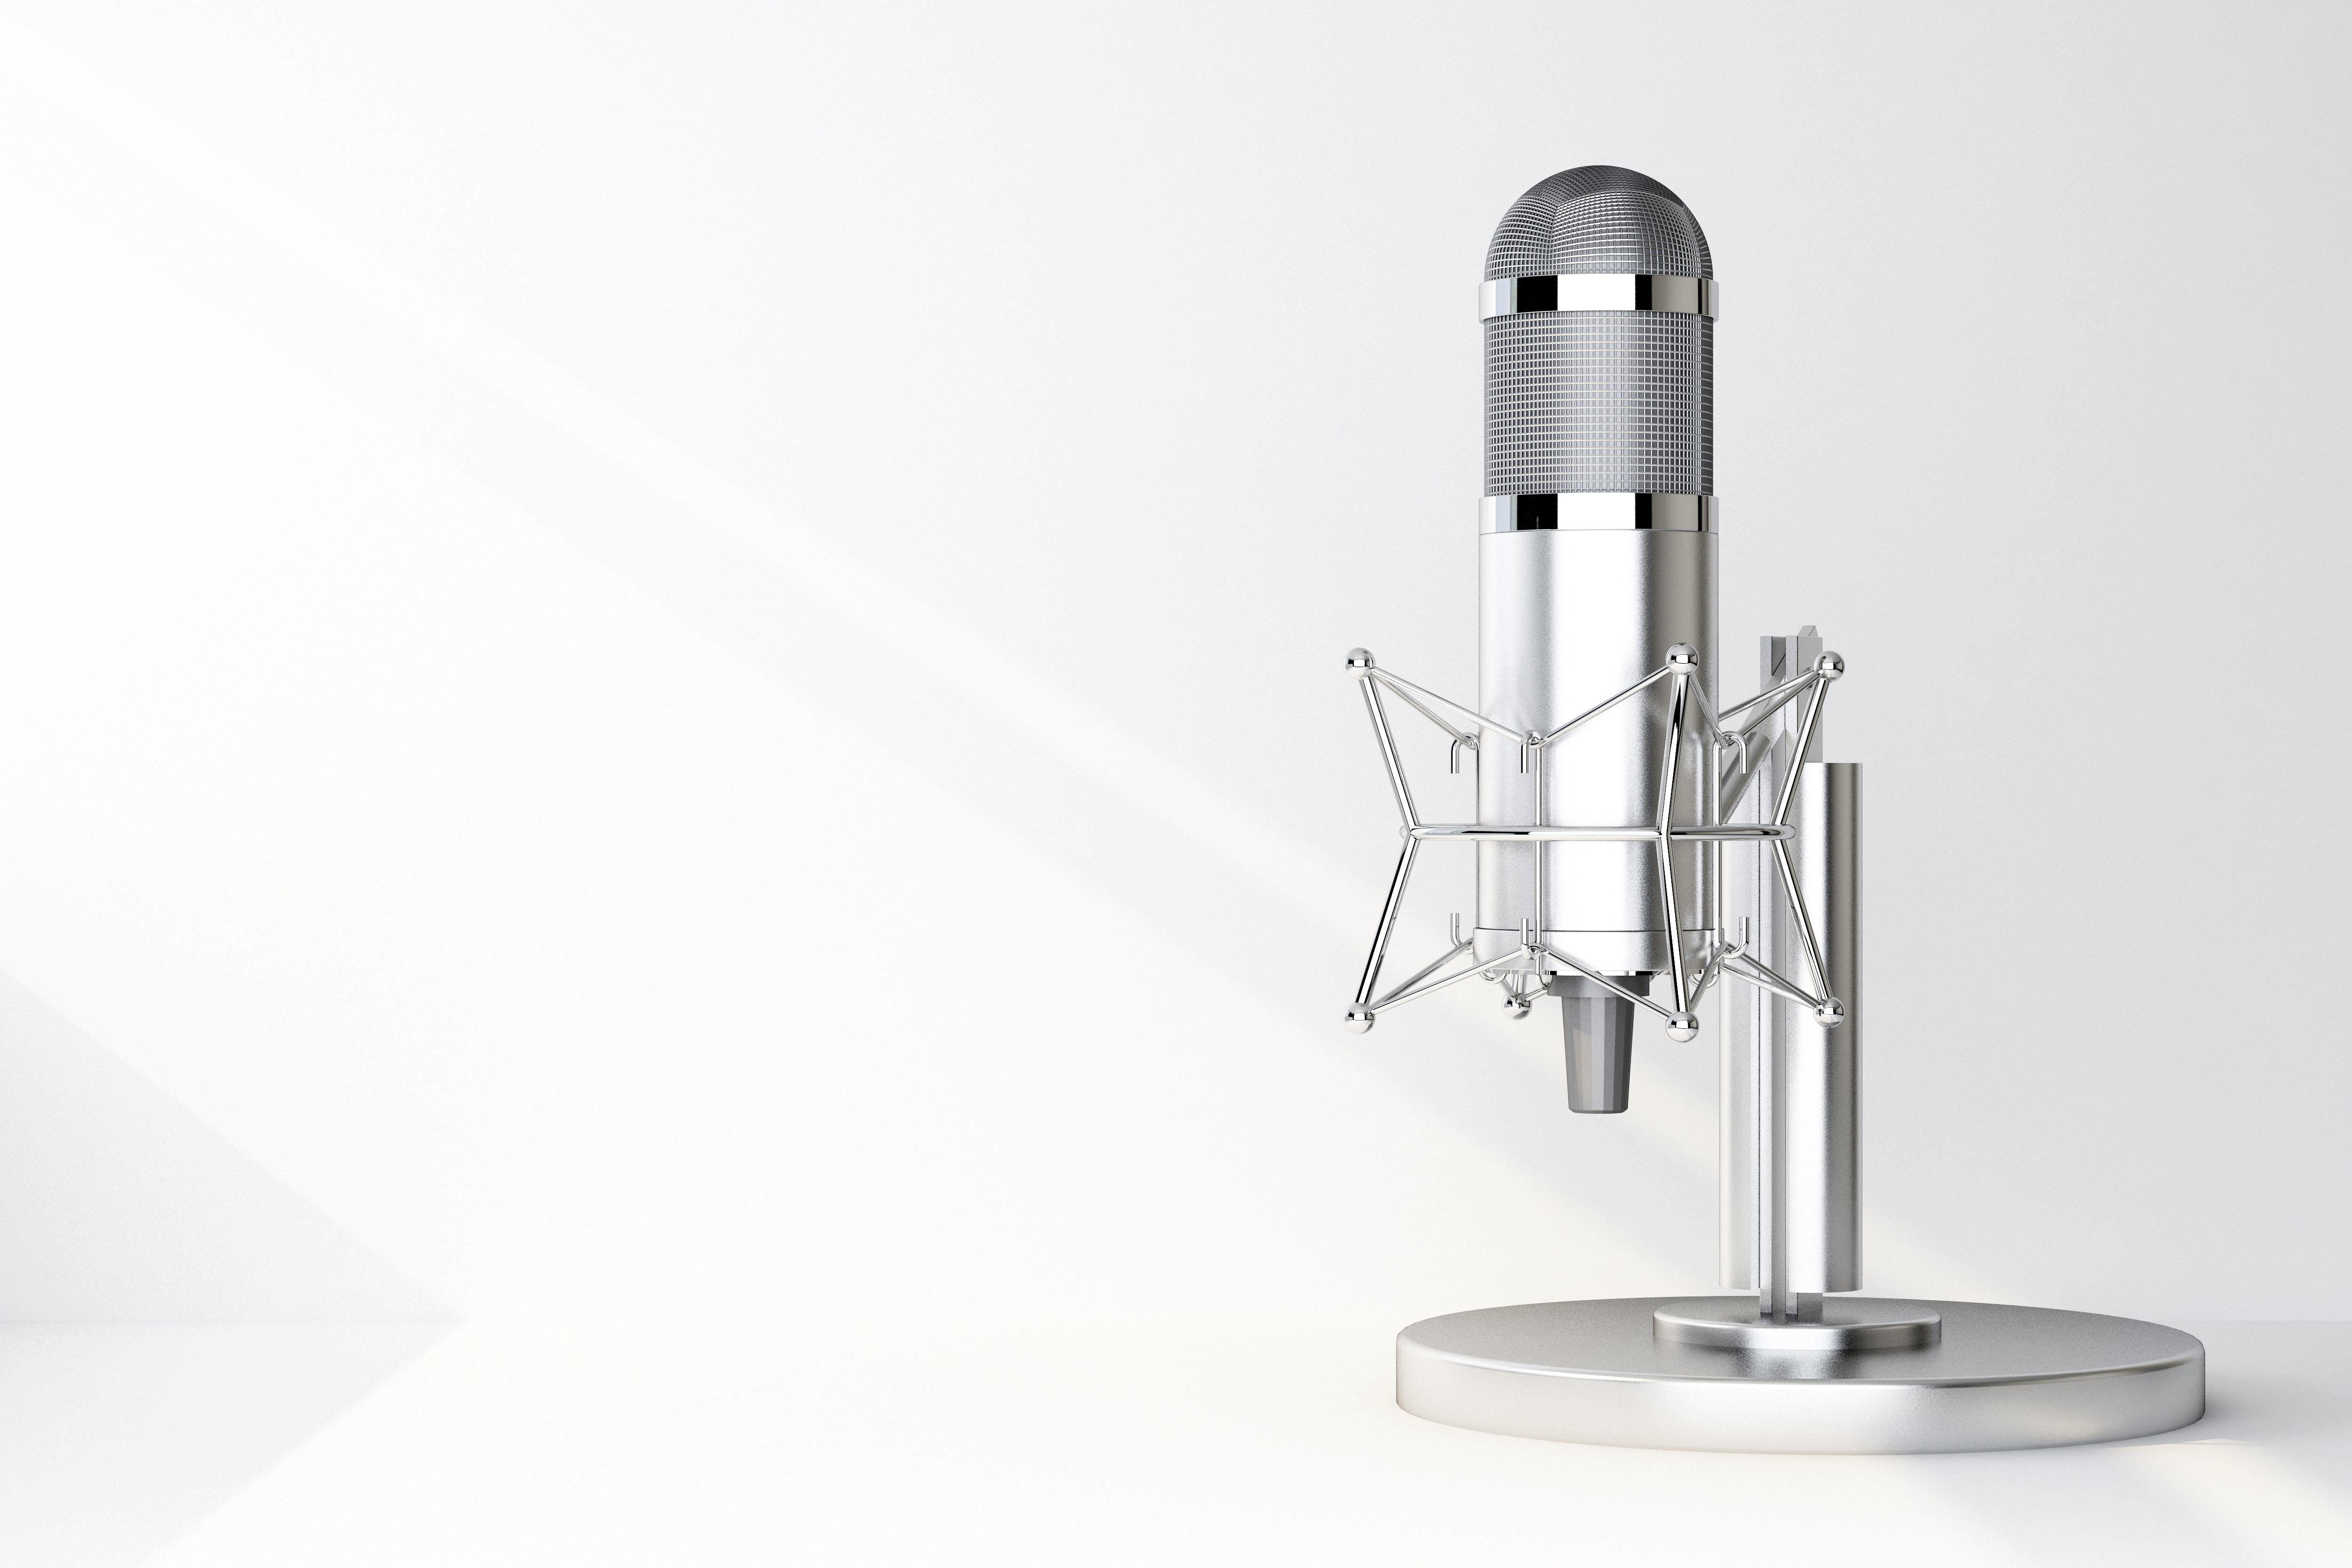 Microphone to use for recording content marketing